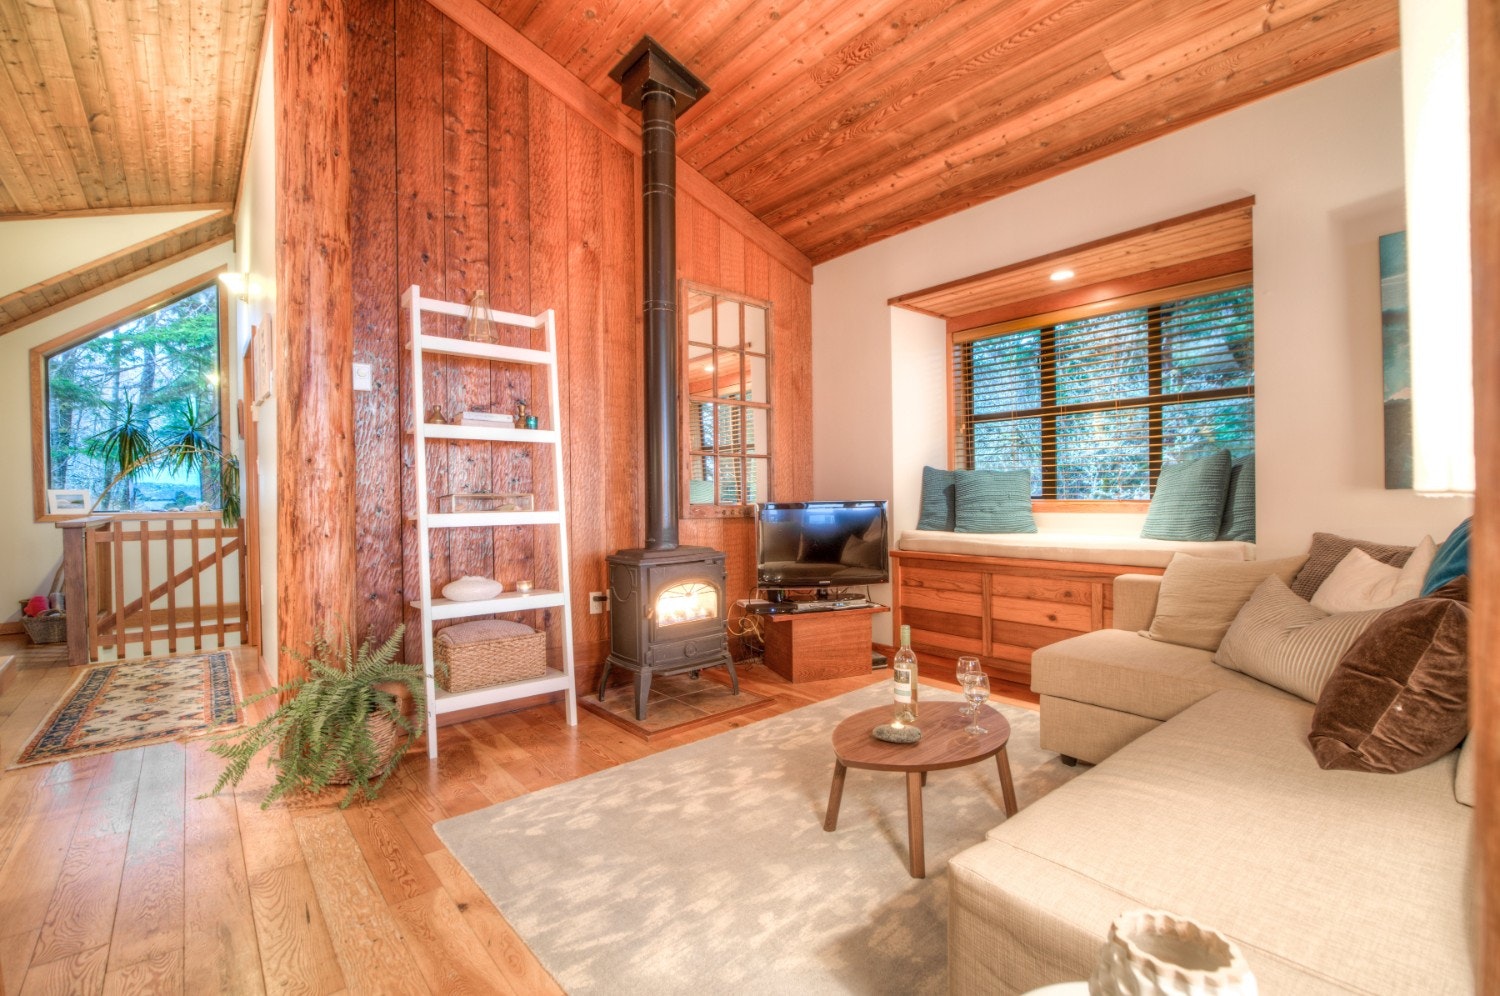 A wooden panelled living room in a forest